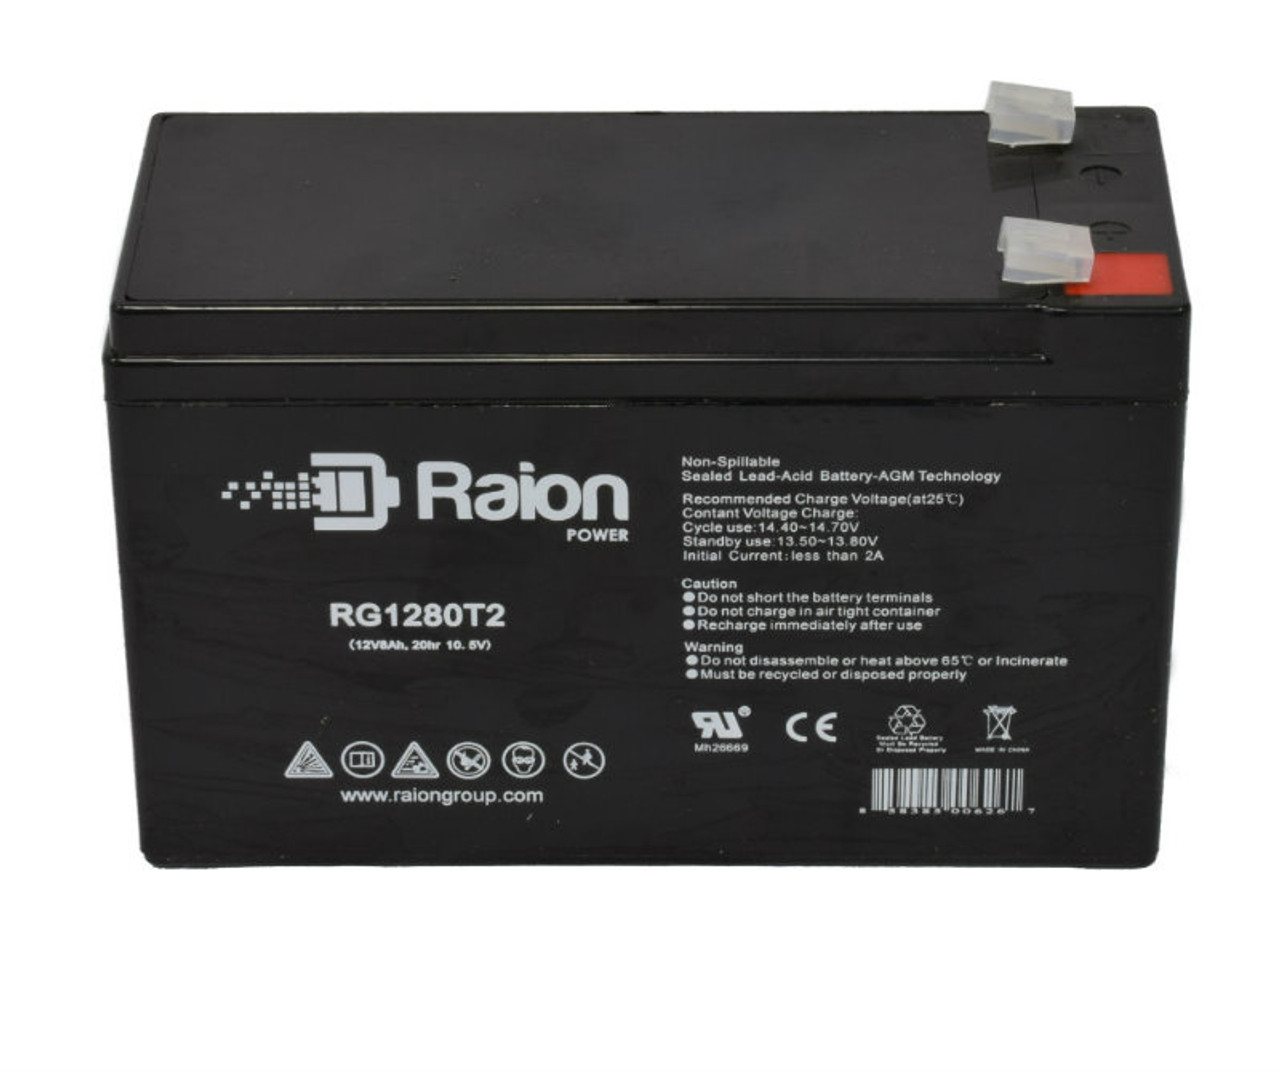 Raion Power Replacement 12V 8Ah Battery for Medtronic 540 Blood Pump - 1 Pack